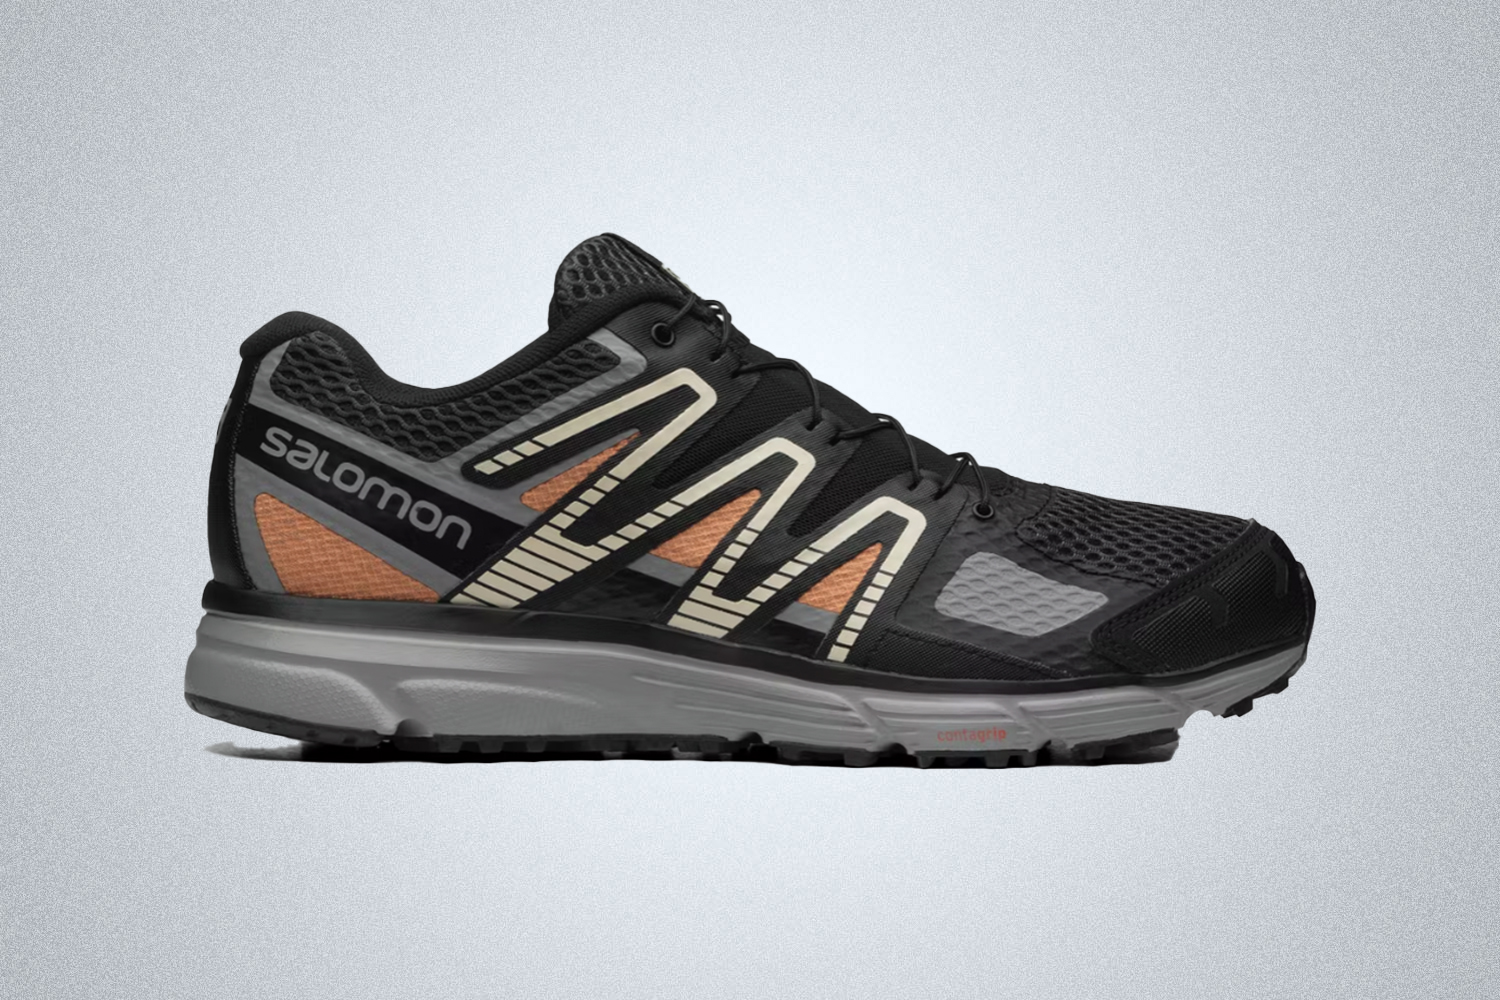 a pair of black sneakers from Salomon on a grey background